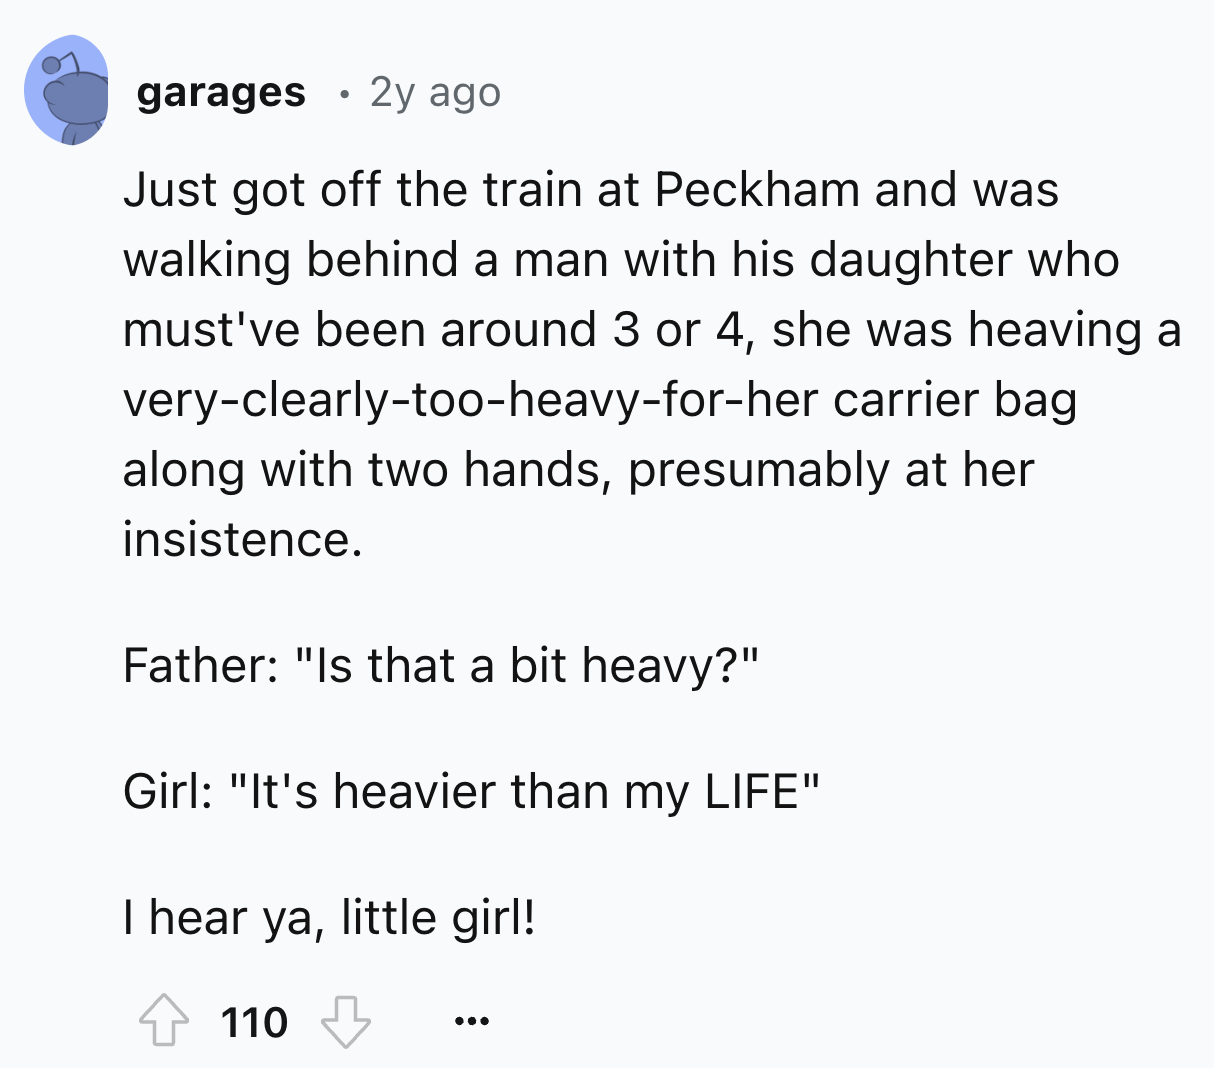 screenshot - . garages 2y ago Just got off the train at Peckham and was walking behind a man with his daughter who must've been around 3 or 4, she was heaving a veryclearlytooheavyforher carrier bag along with two hands, presumably at her insistence. Fath